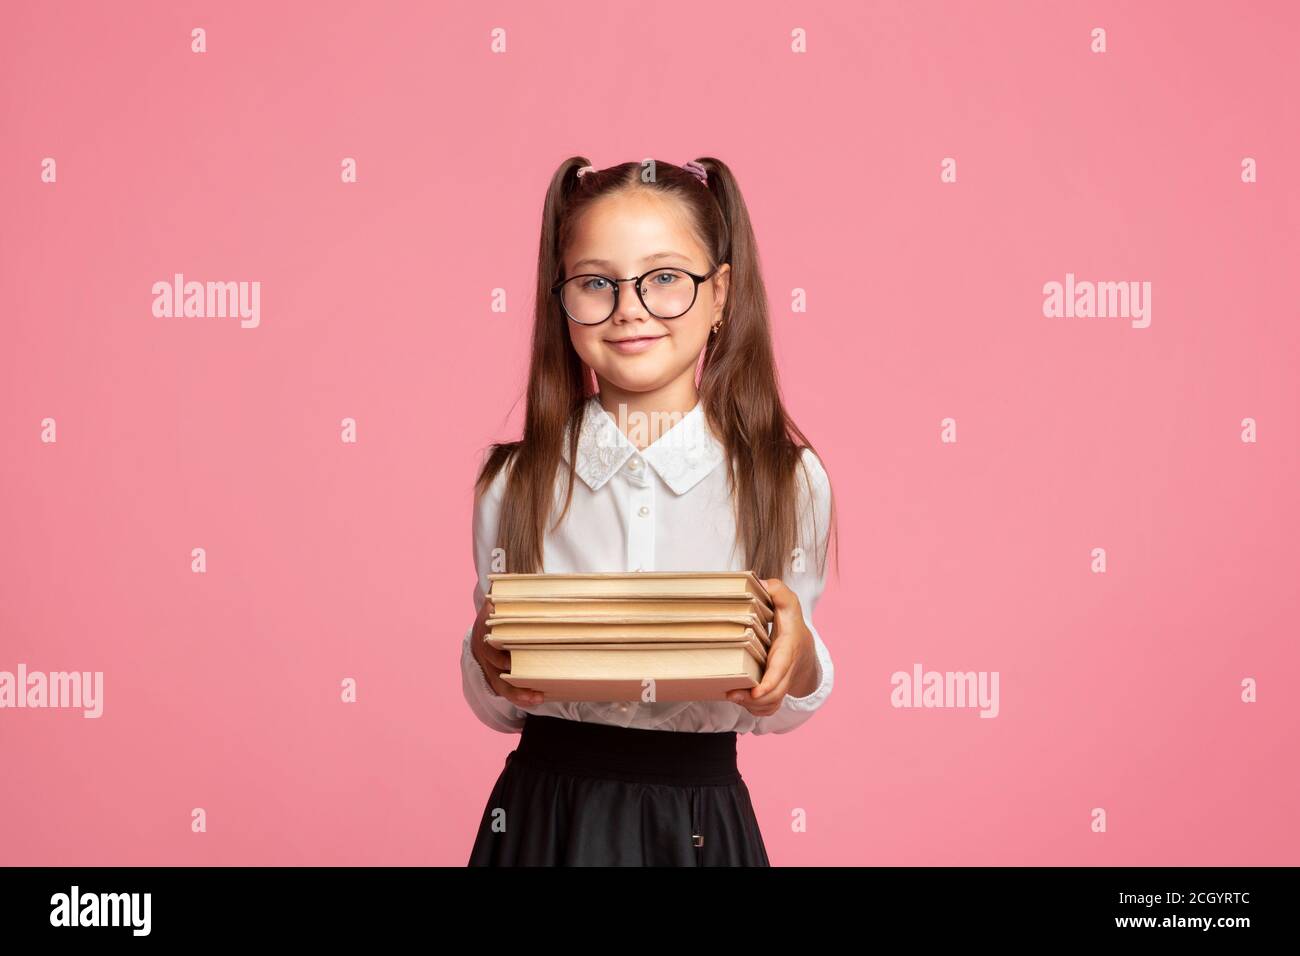 School and library concept. Little girl in school uniform and glasses holds books Stock Photo